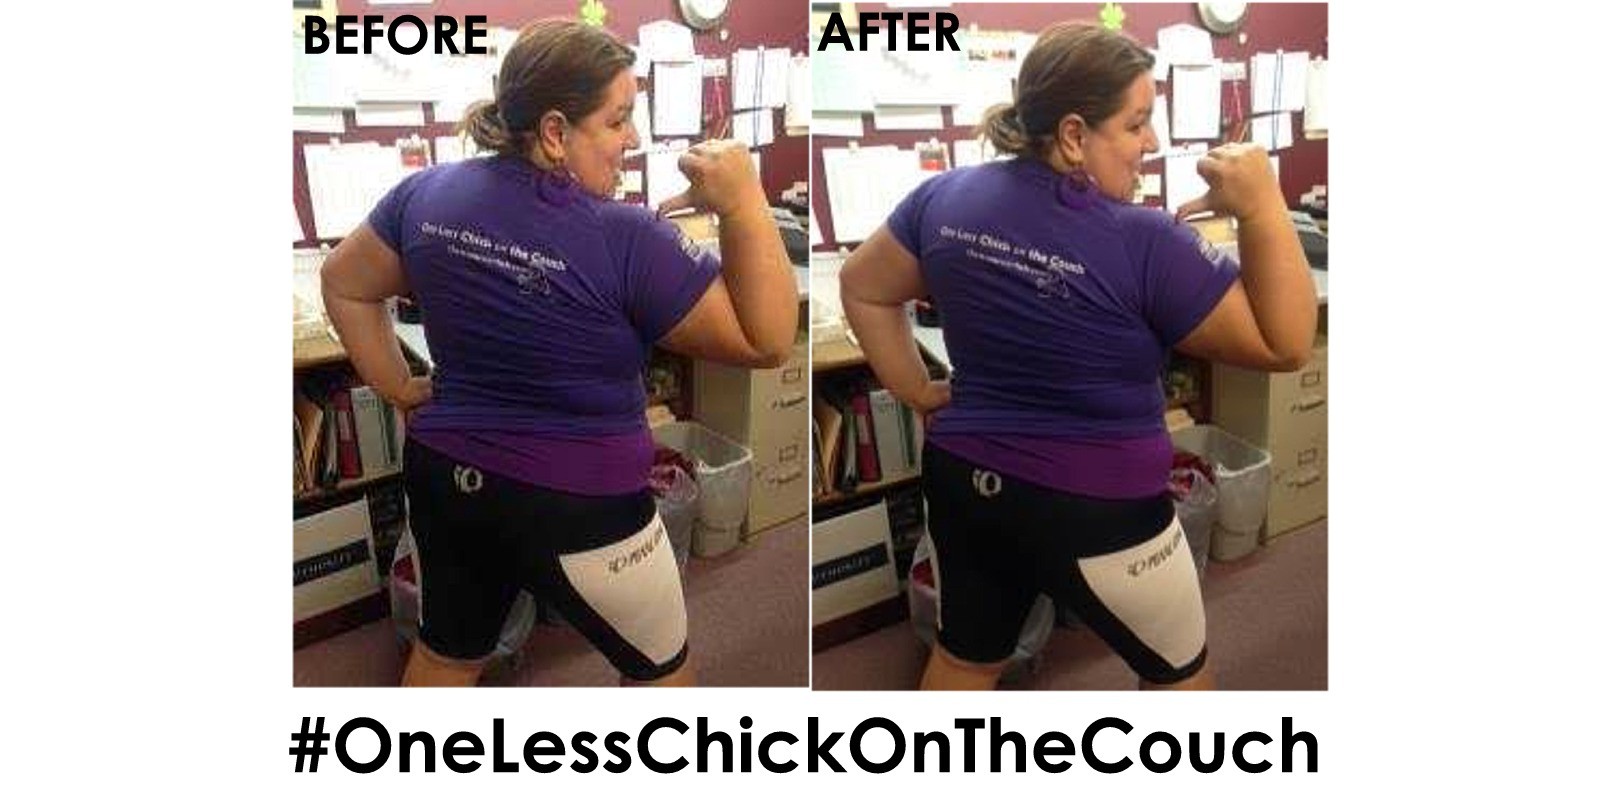 From 100 Pounds in 1 Year to 1 Less Chick on the Couch